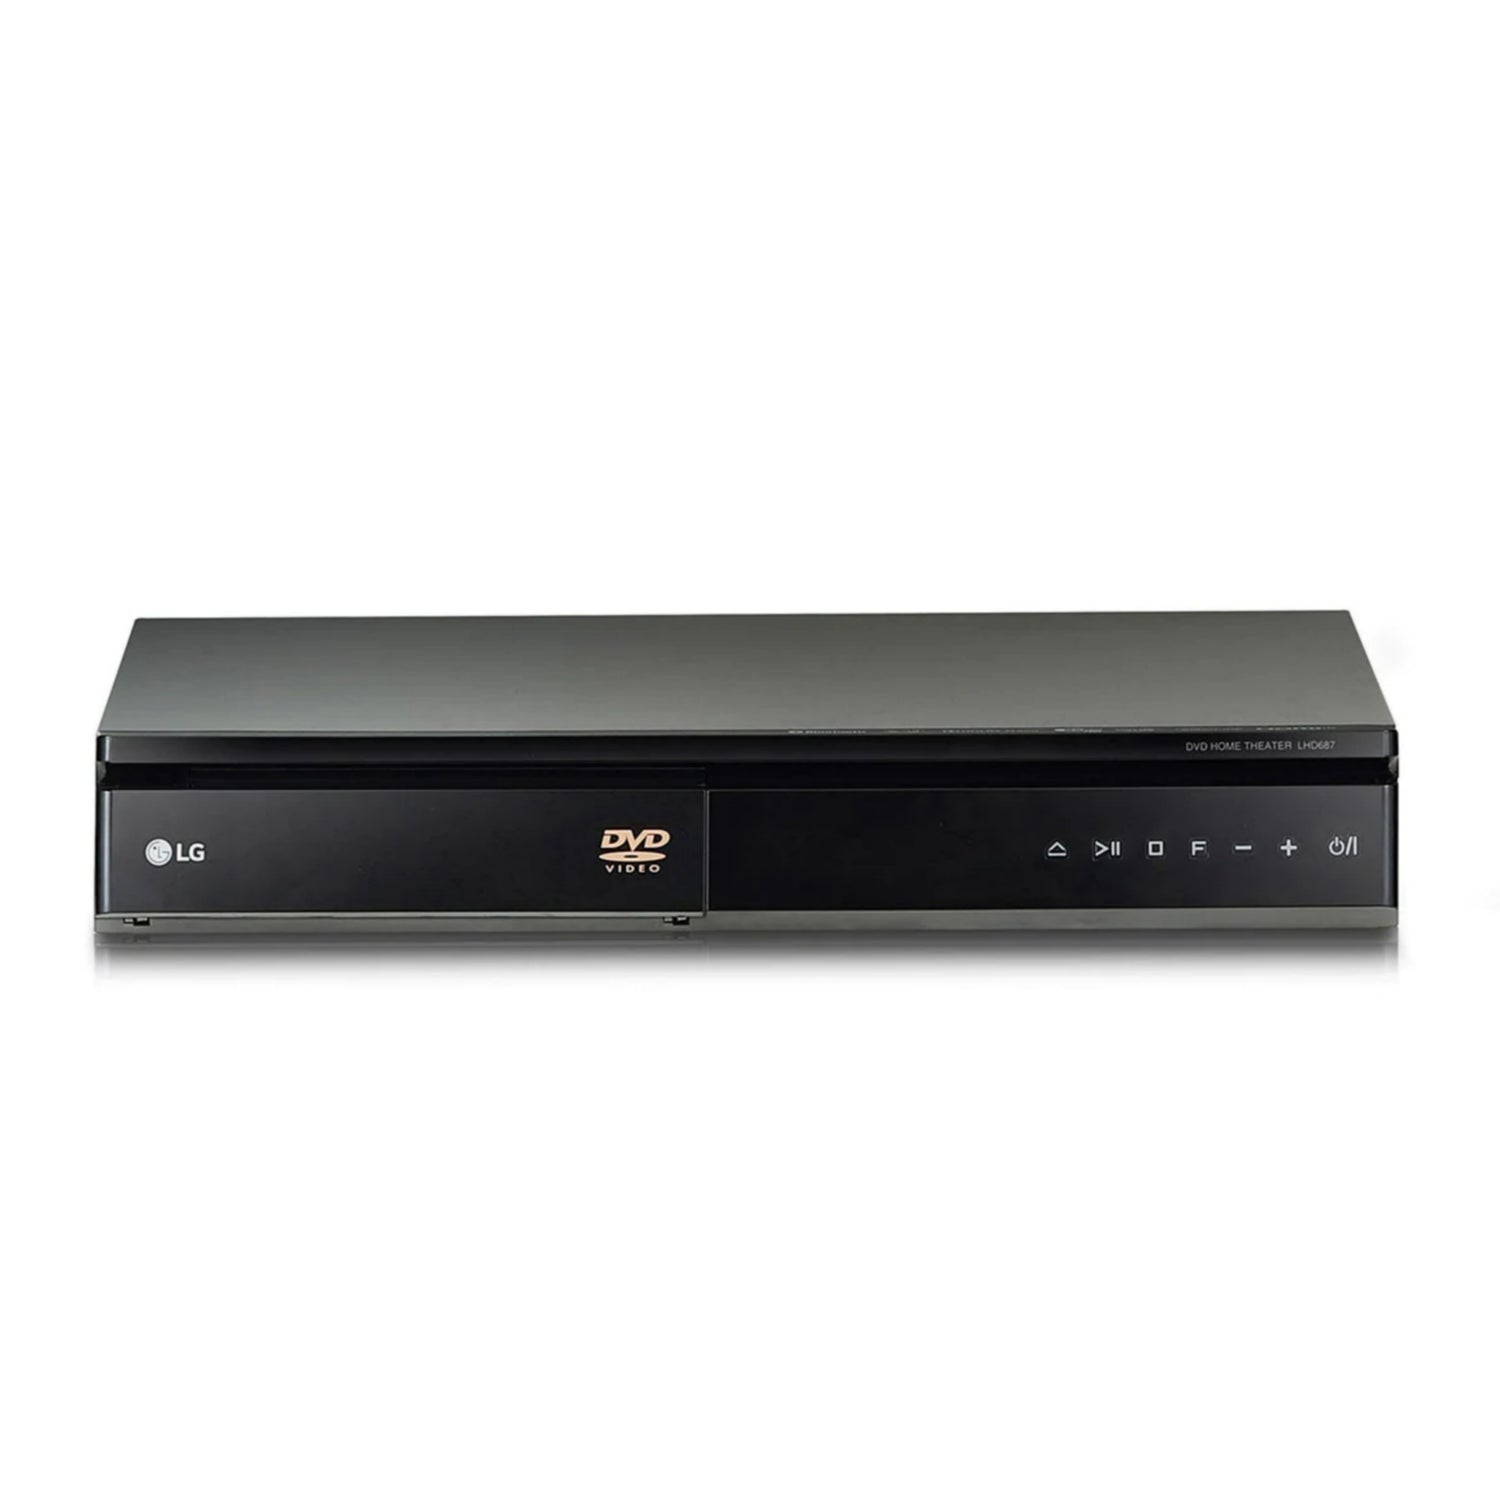 LG Home Theater Engines (DVD Receivers)